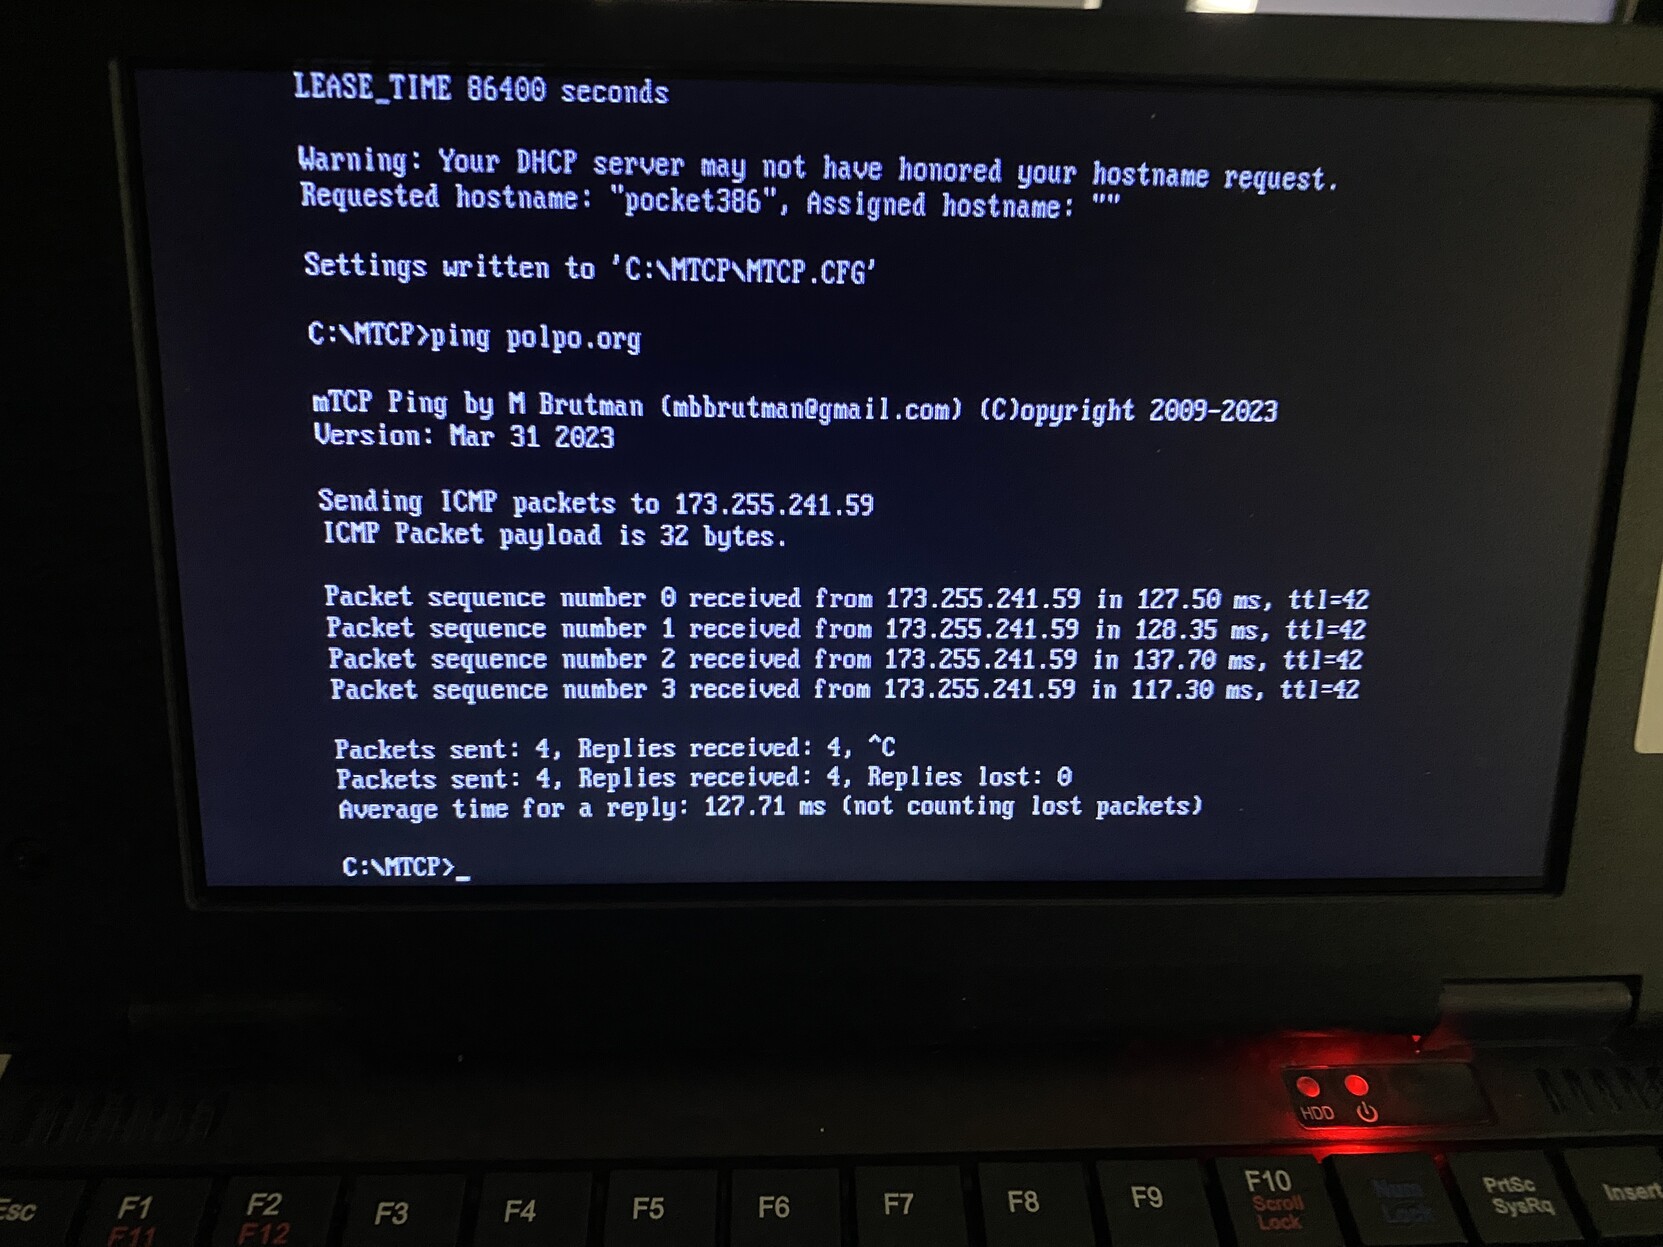 The screen of the Pocket386 showing getting a DHCP lease and pinging polpo.org